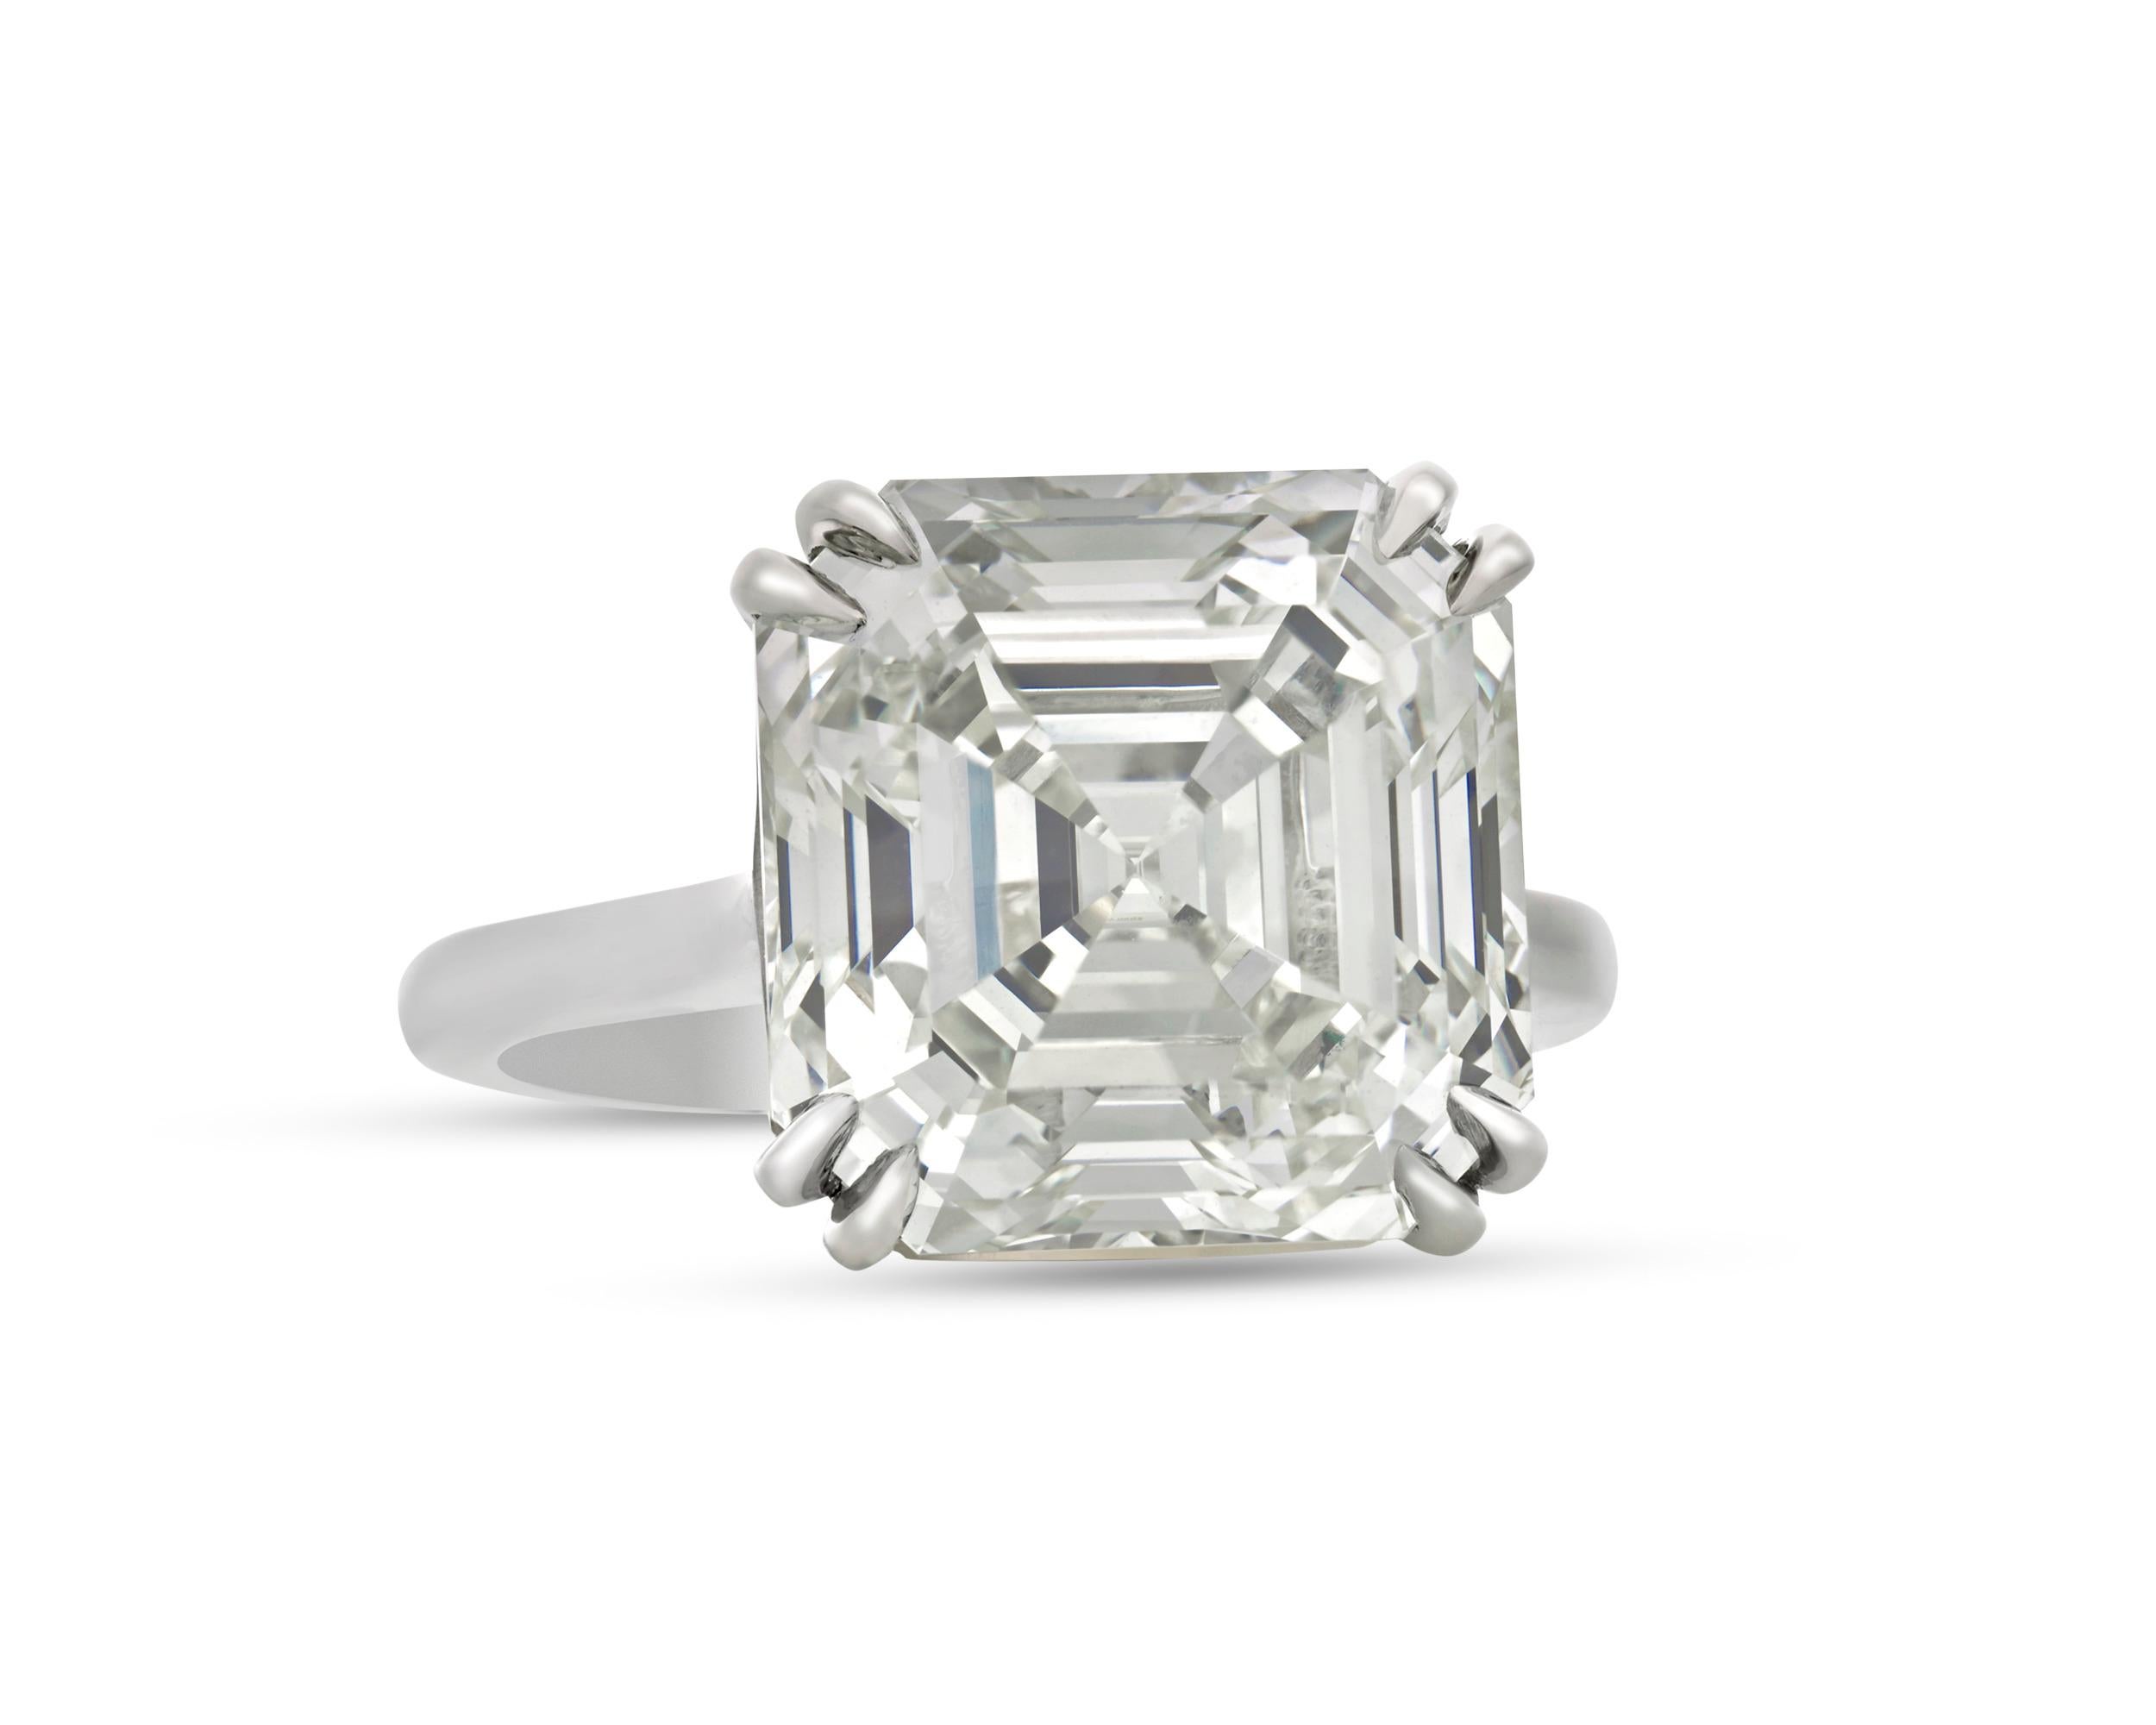 A stunningly beautiful Royal Asscher-cut diamond weighing an impressive 10.73 carats serves as the centerpiece of this breathtaking solitaire ring. The ring’s understated setting crafted of platinum lends this jewelry creation a timeless elegance. A